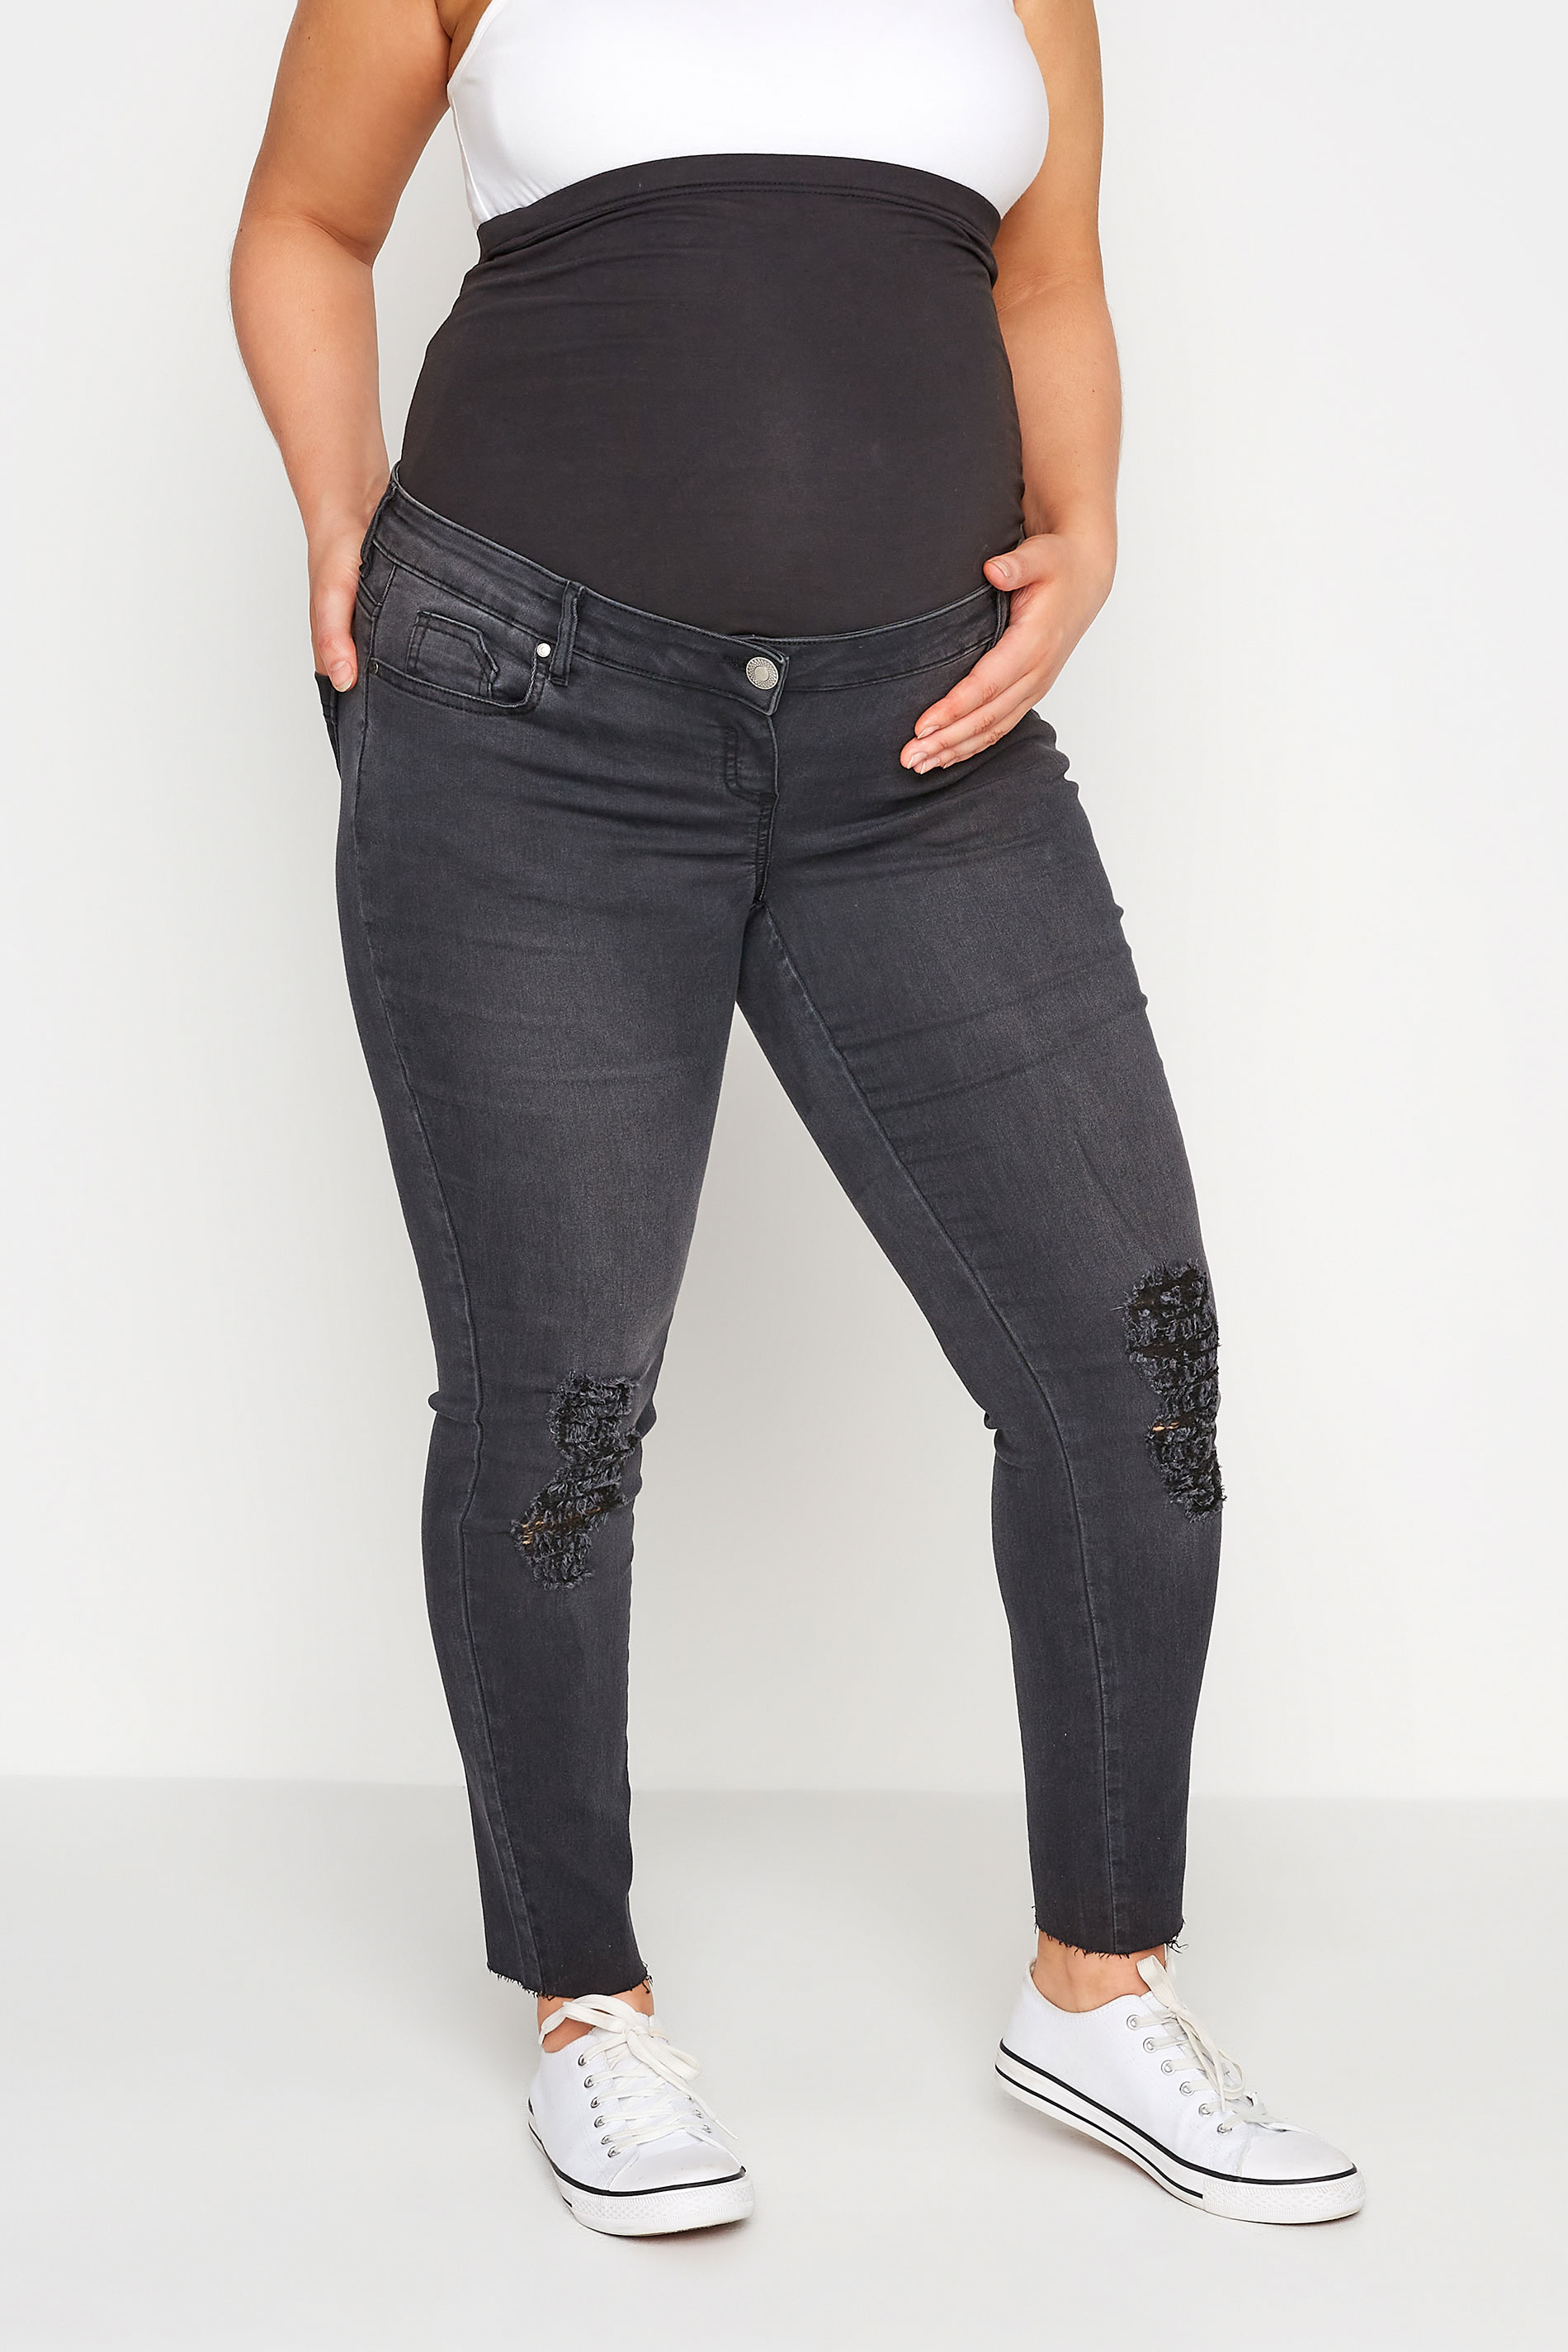 BUMP IT UP MATERNITY Plus Size Black Washed Ripped AVA Jeans With Comfort Panel | Yours Clothing 2